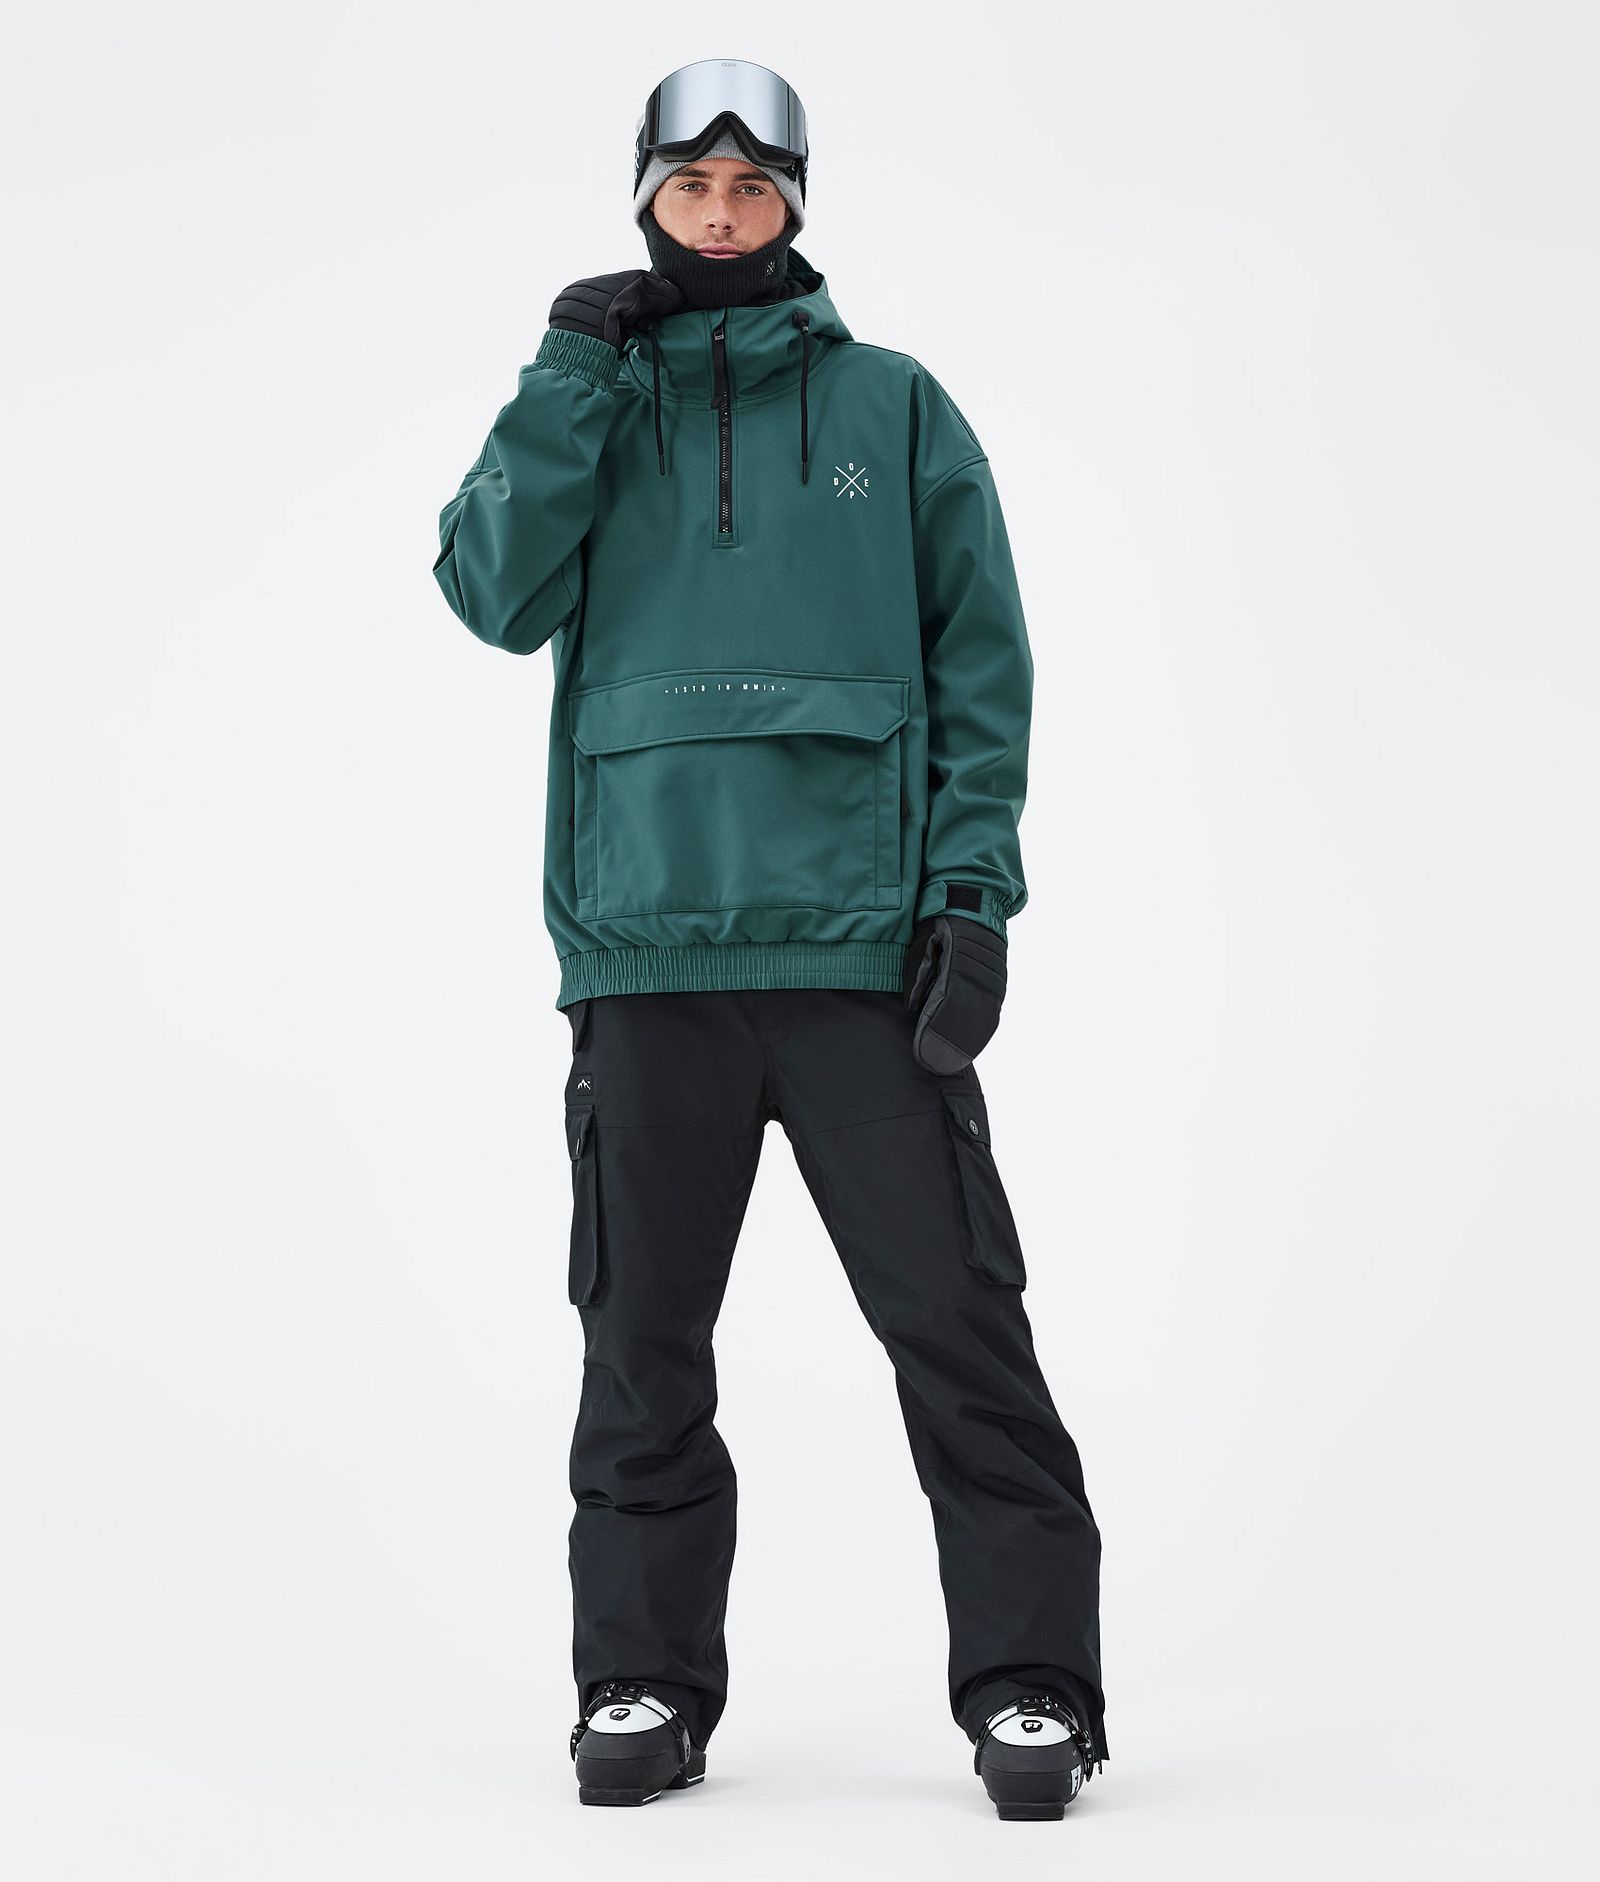 Dope Cyclone Outfit Ski Homme Bottle Green/Blackout, Image 1 of 2